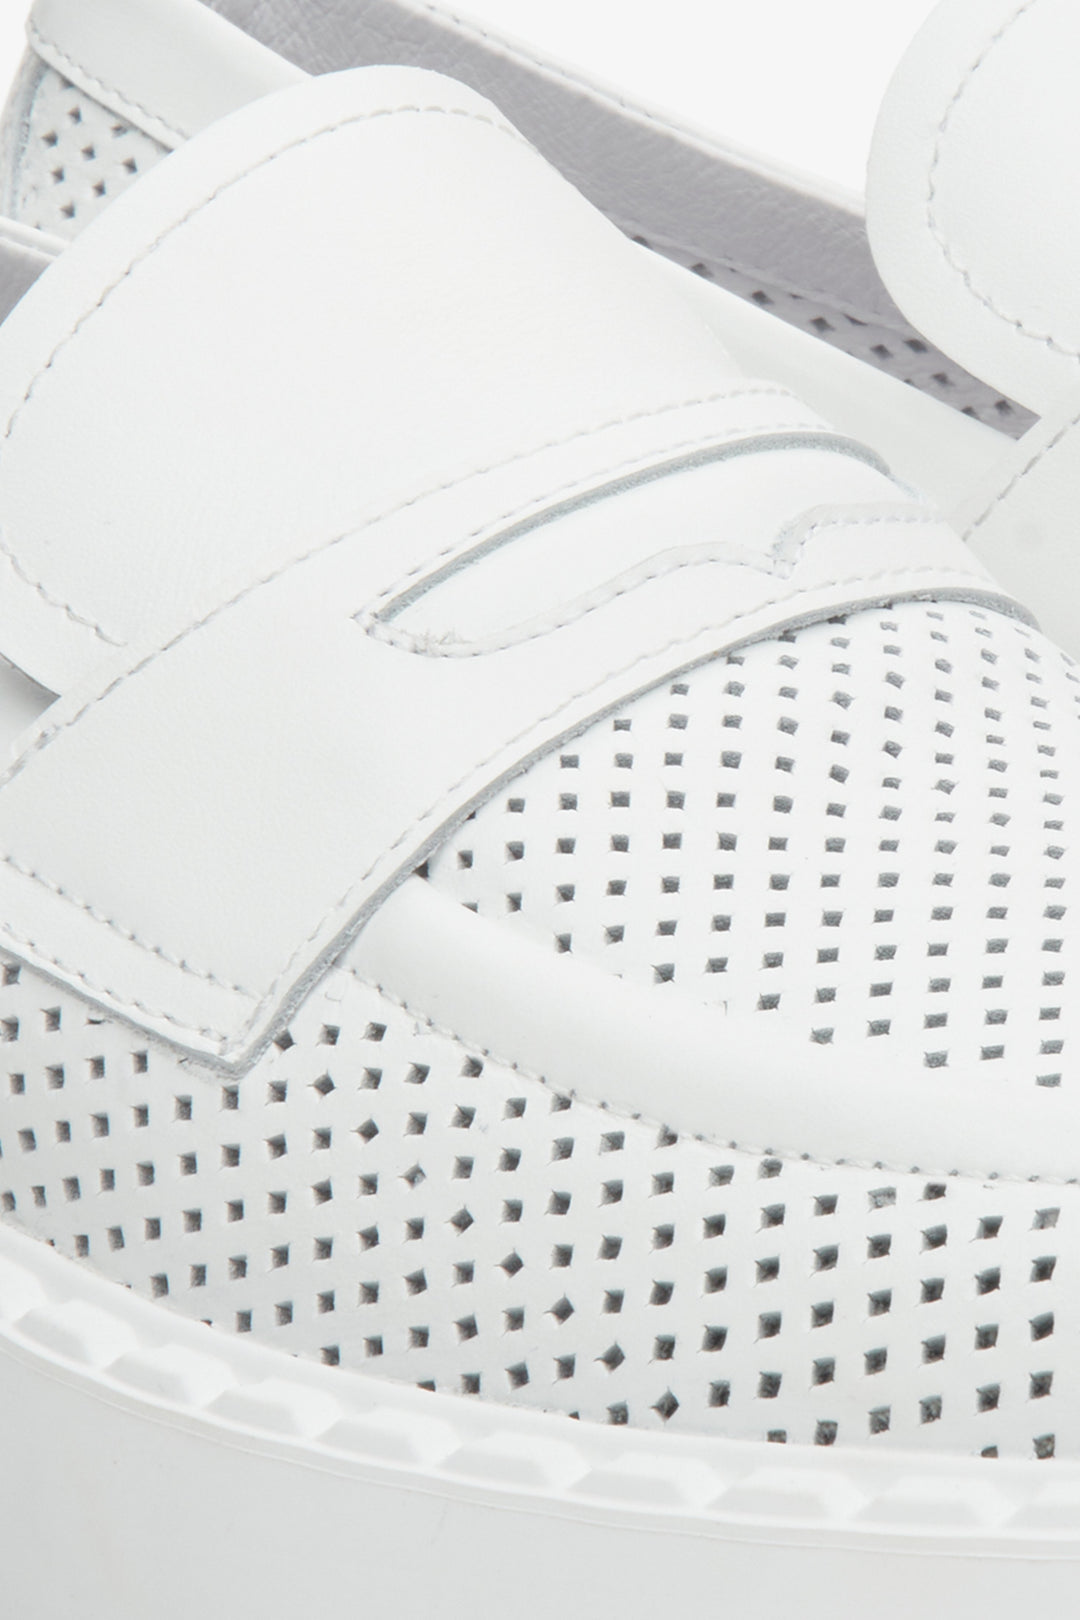 Women's leather loafers for summer in white color, brand Estro - close-up on the stitching system and perforation.